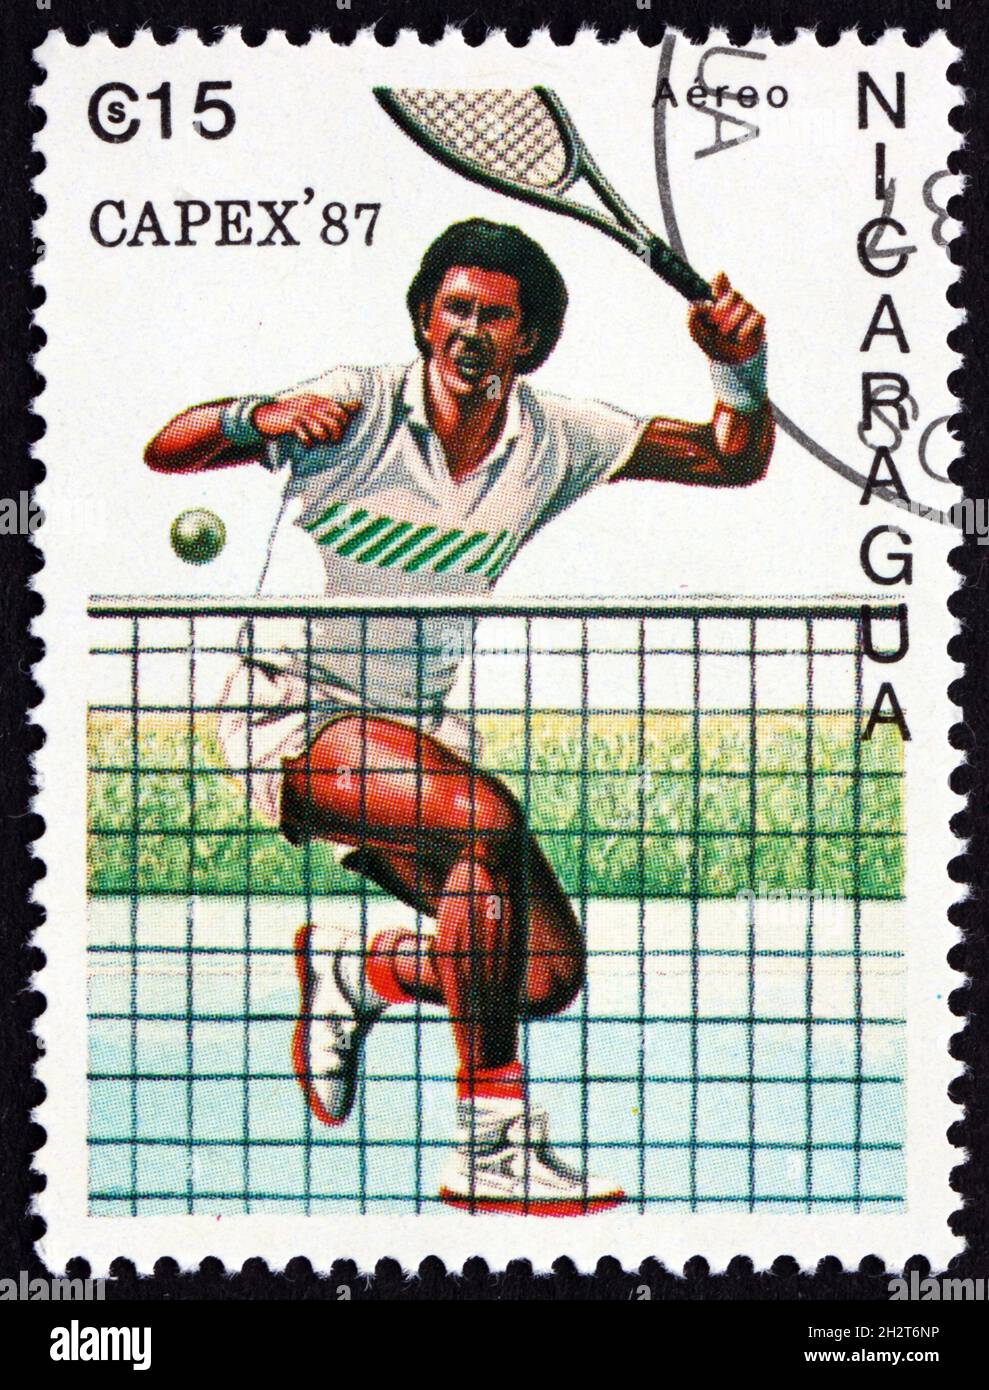 NICARAGUA - CIRCA 1987: a stamp printed in Nicaragua shows Male Tennis Player in Action, circa 1987 Stock Photo